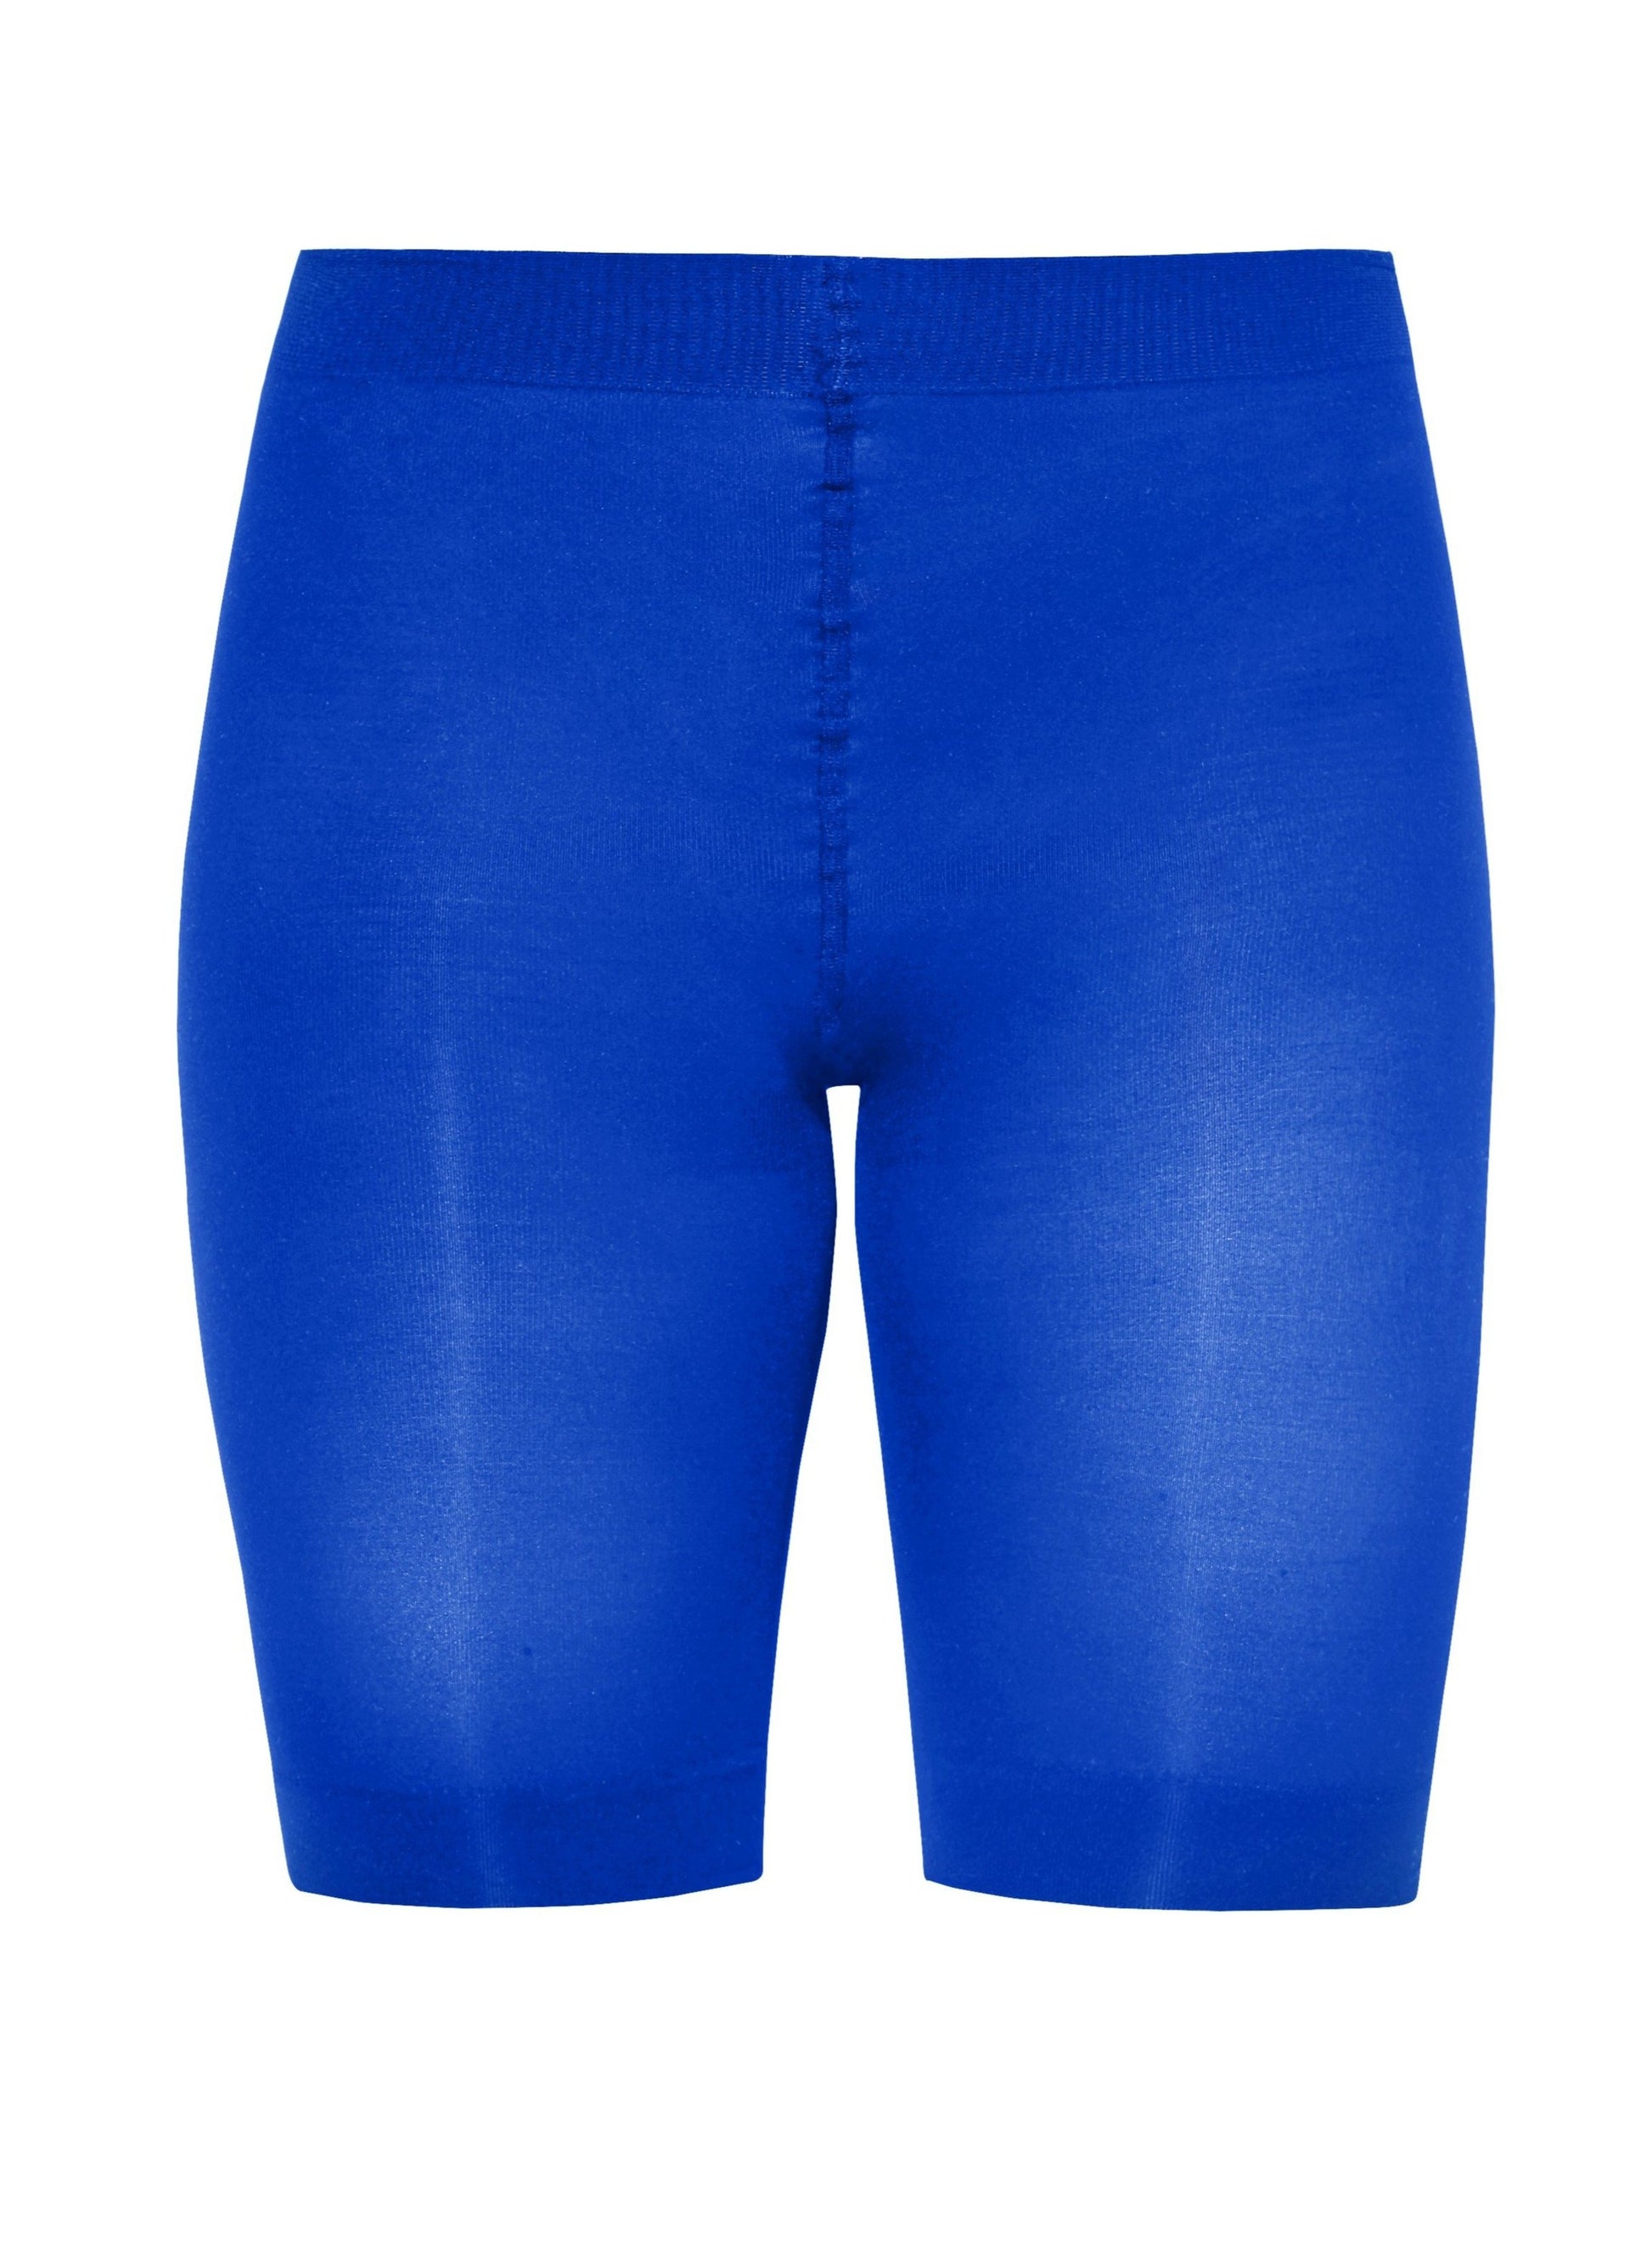 Sneaky Fox Microfibre Shorts - Blue soft matte opaque knee length bicycle short tights with cotton gusset and flat seams.